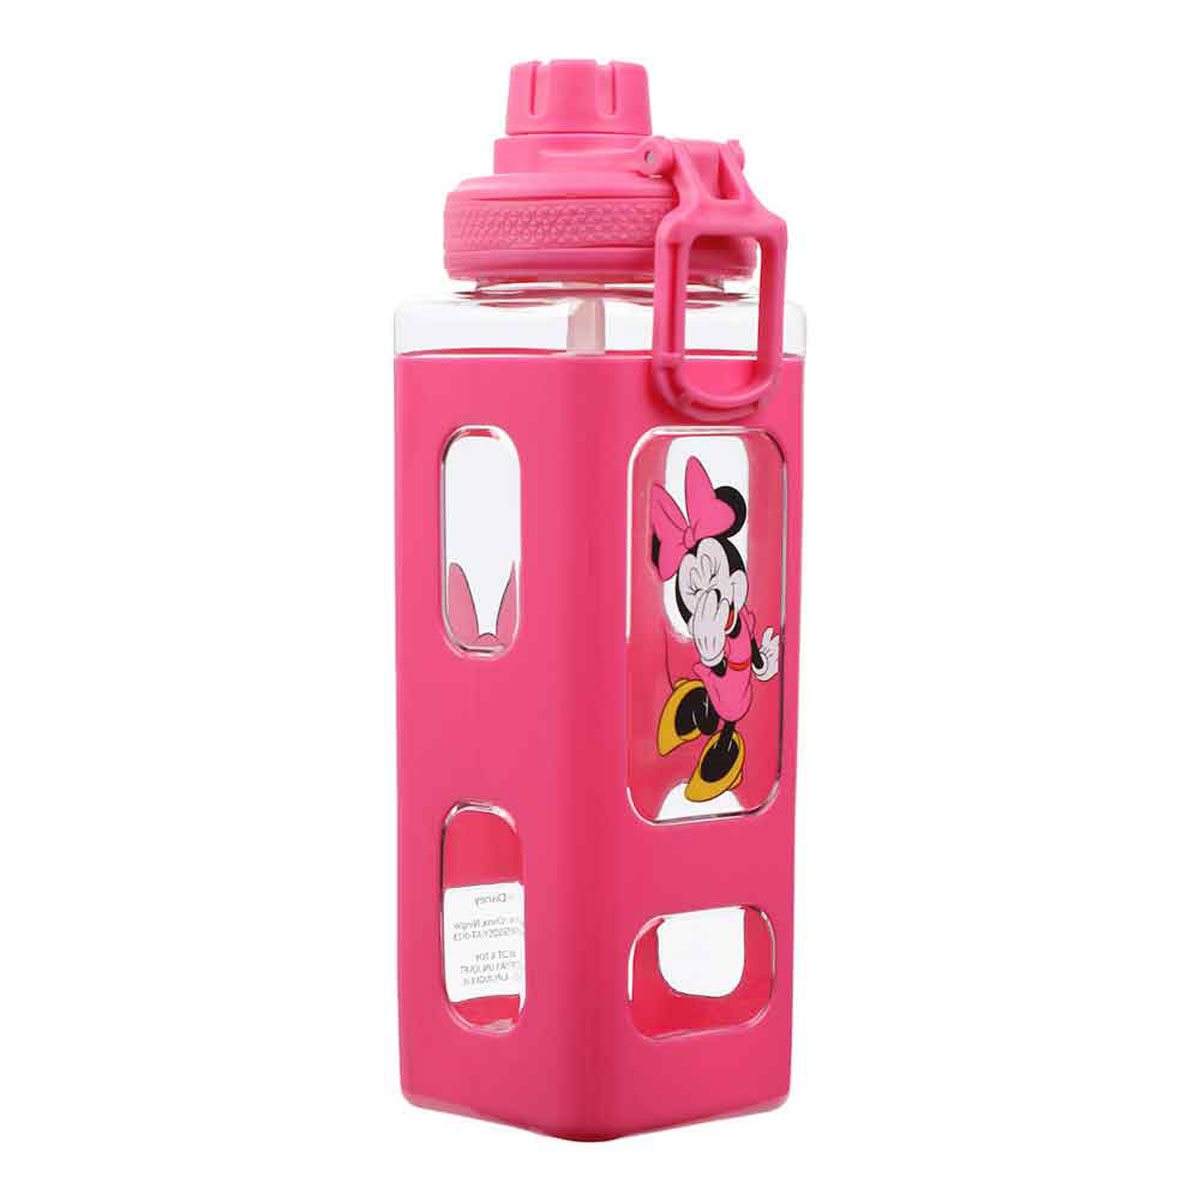 Disney Mickey Mouse 24 Oz. Plastic Square Water Bottle